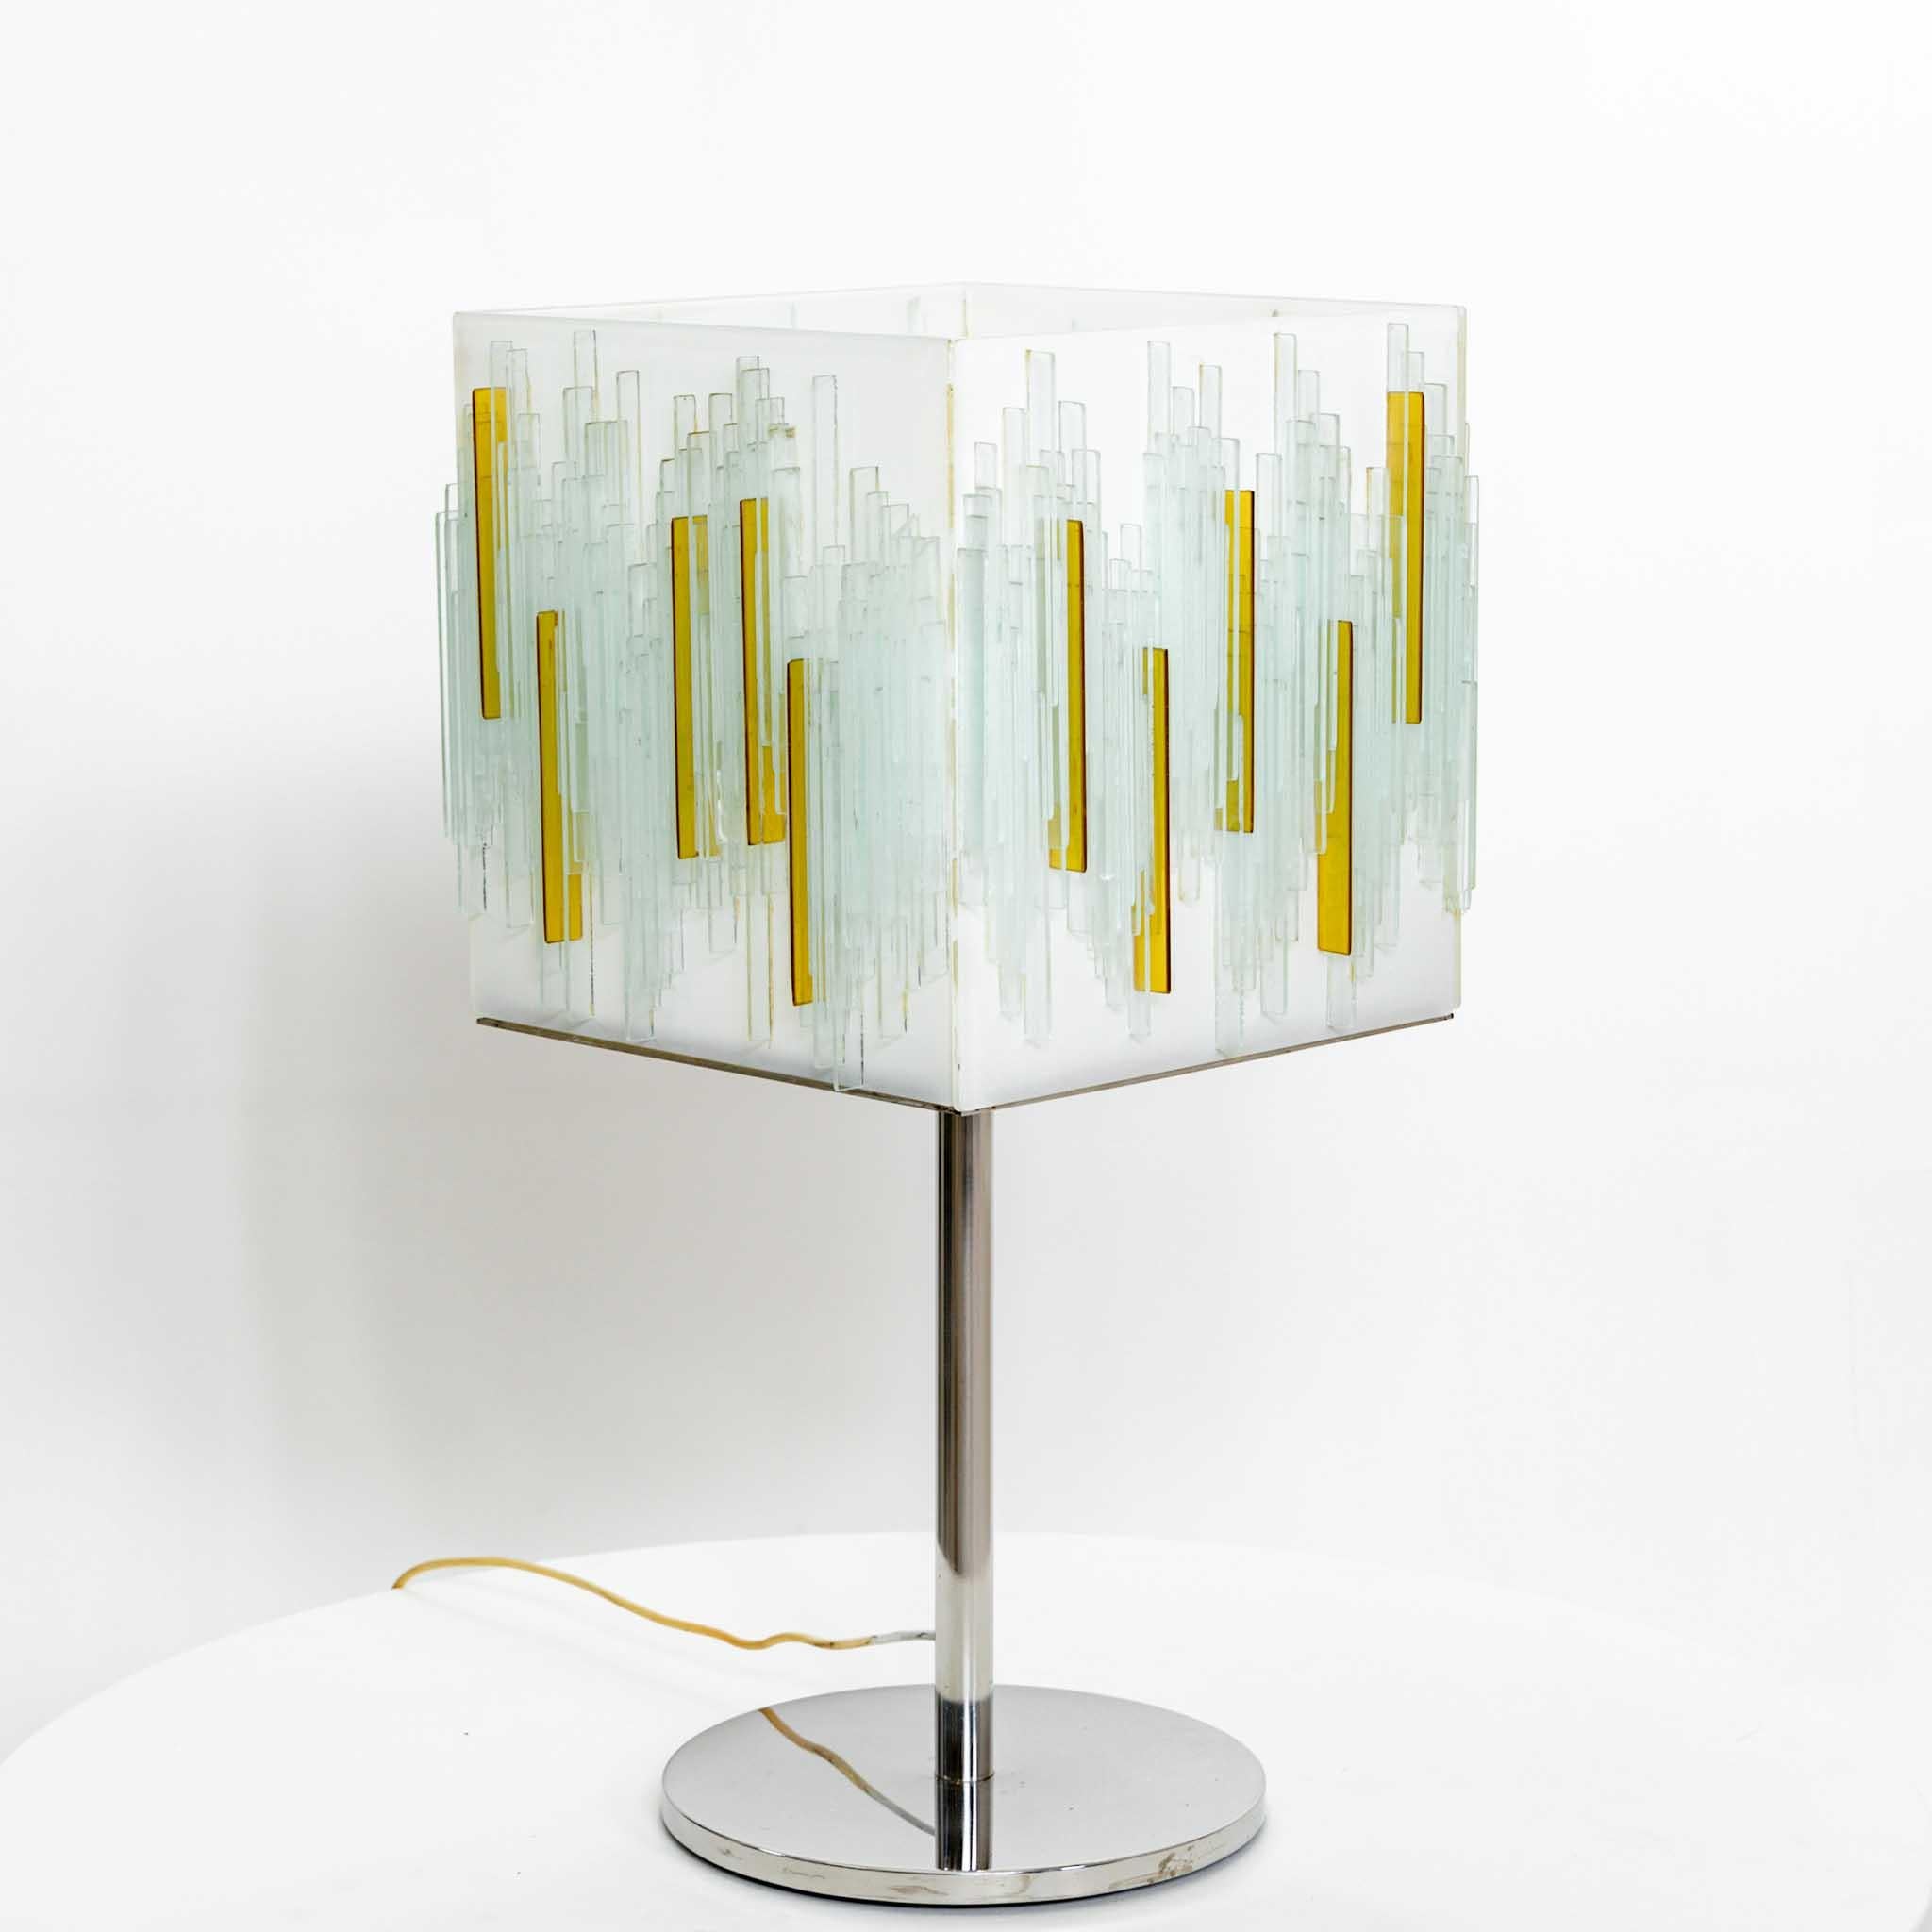 Italian Modernist Art Glass table lamp. 
Heavy Art Glass shade resting on a chromed metal base. 
Glass shade has age and some small chips and fractures.